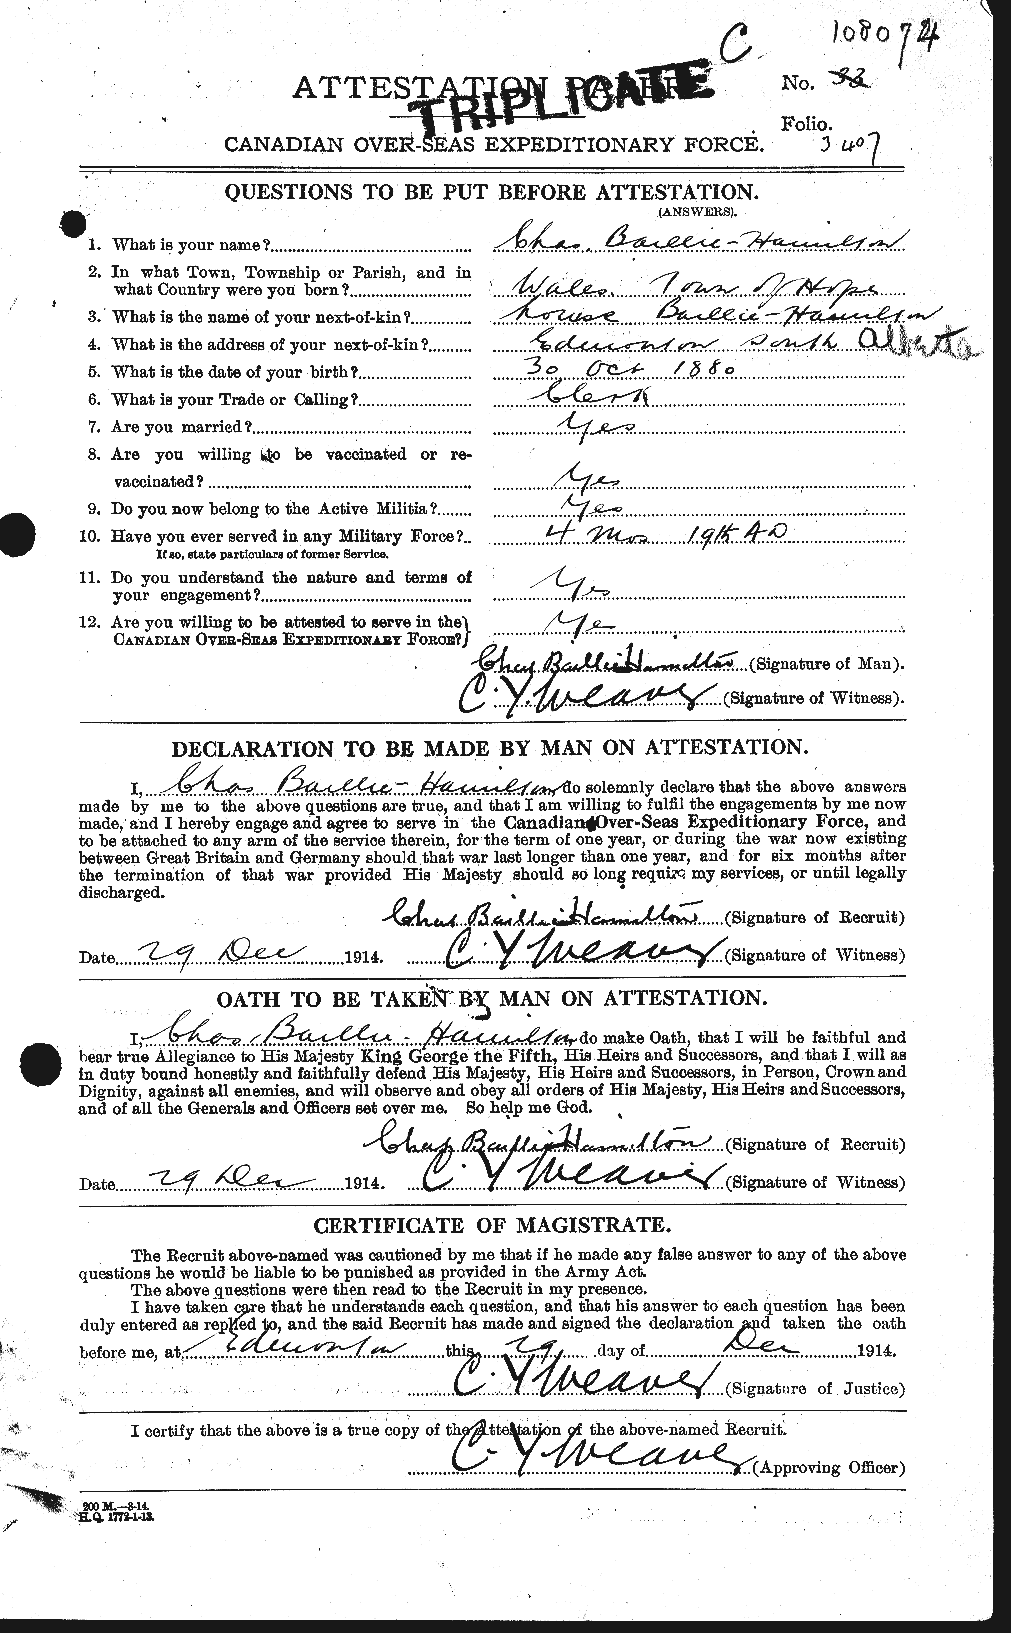 Personnel Records of the First World War - CEF 226265a